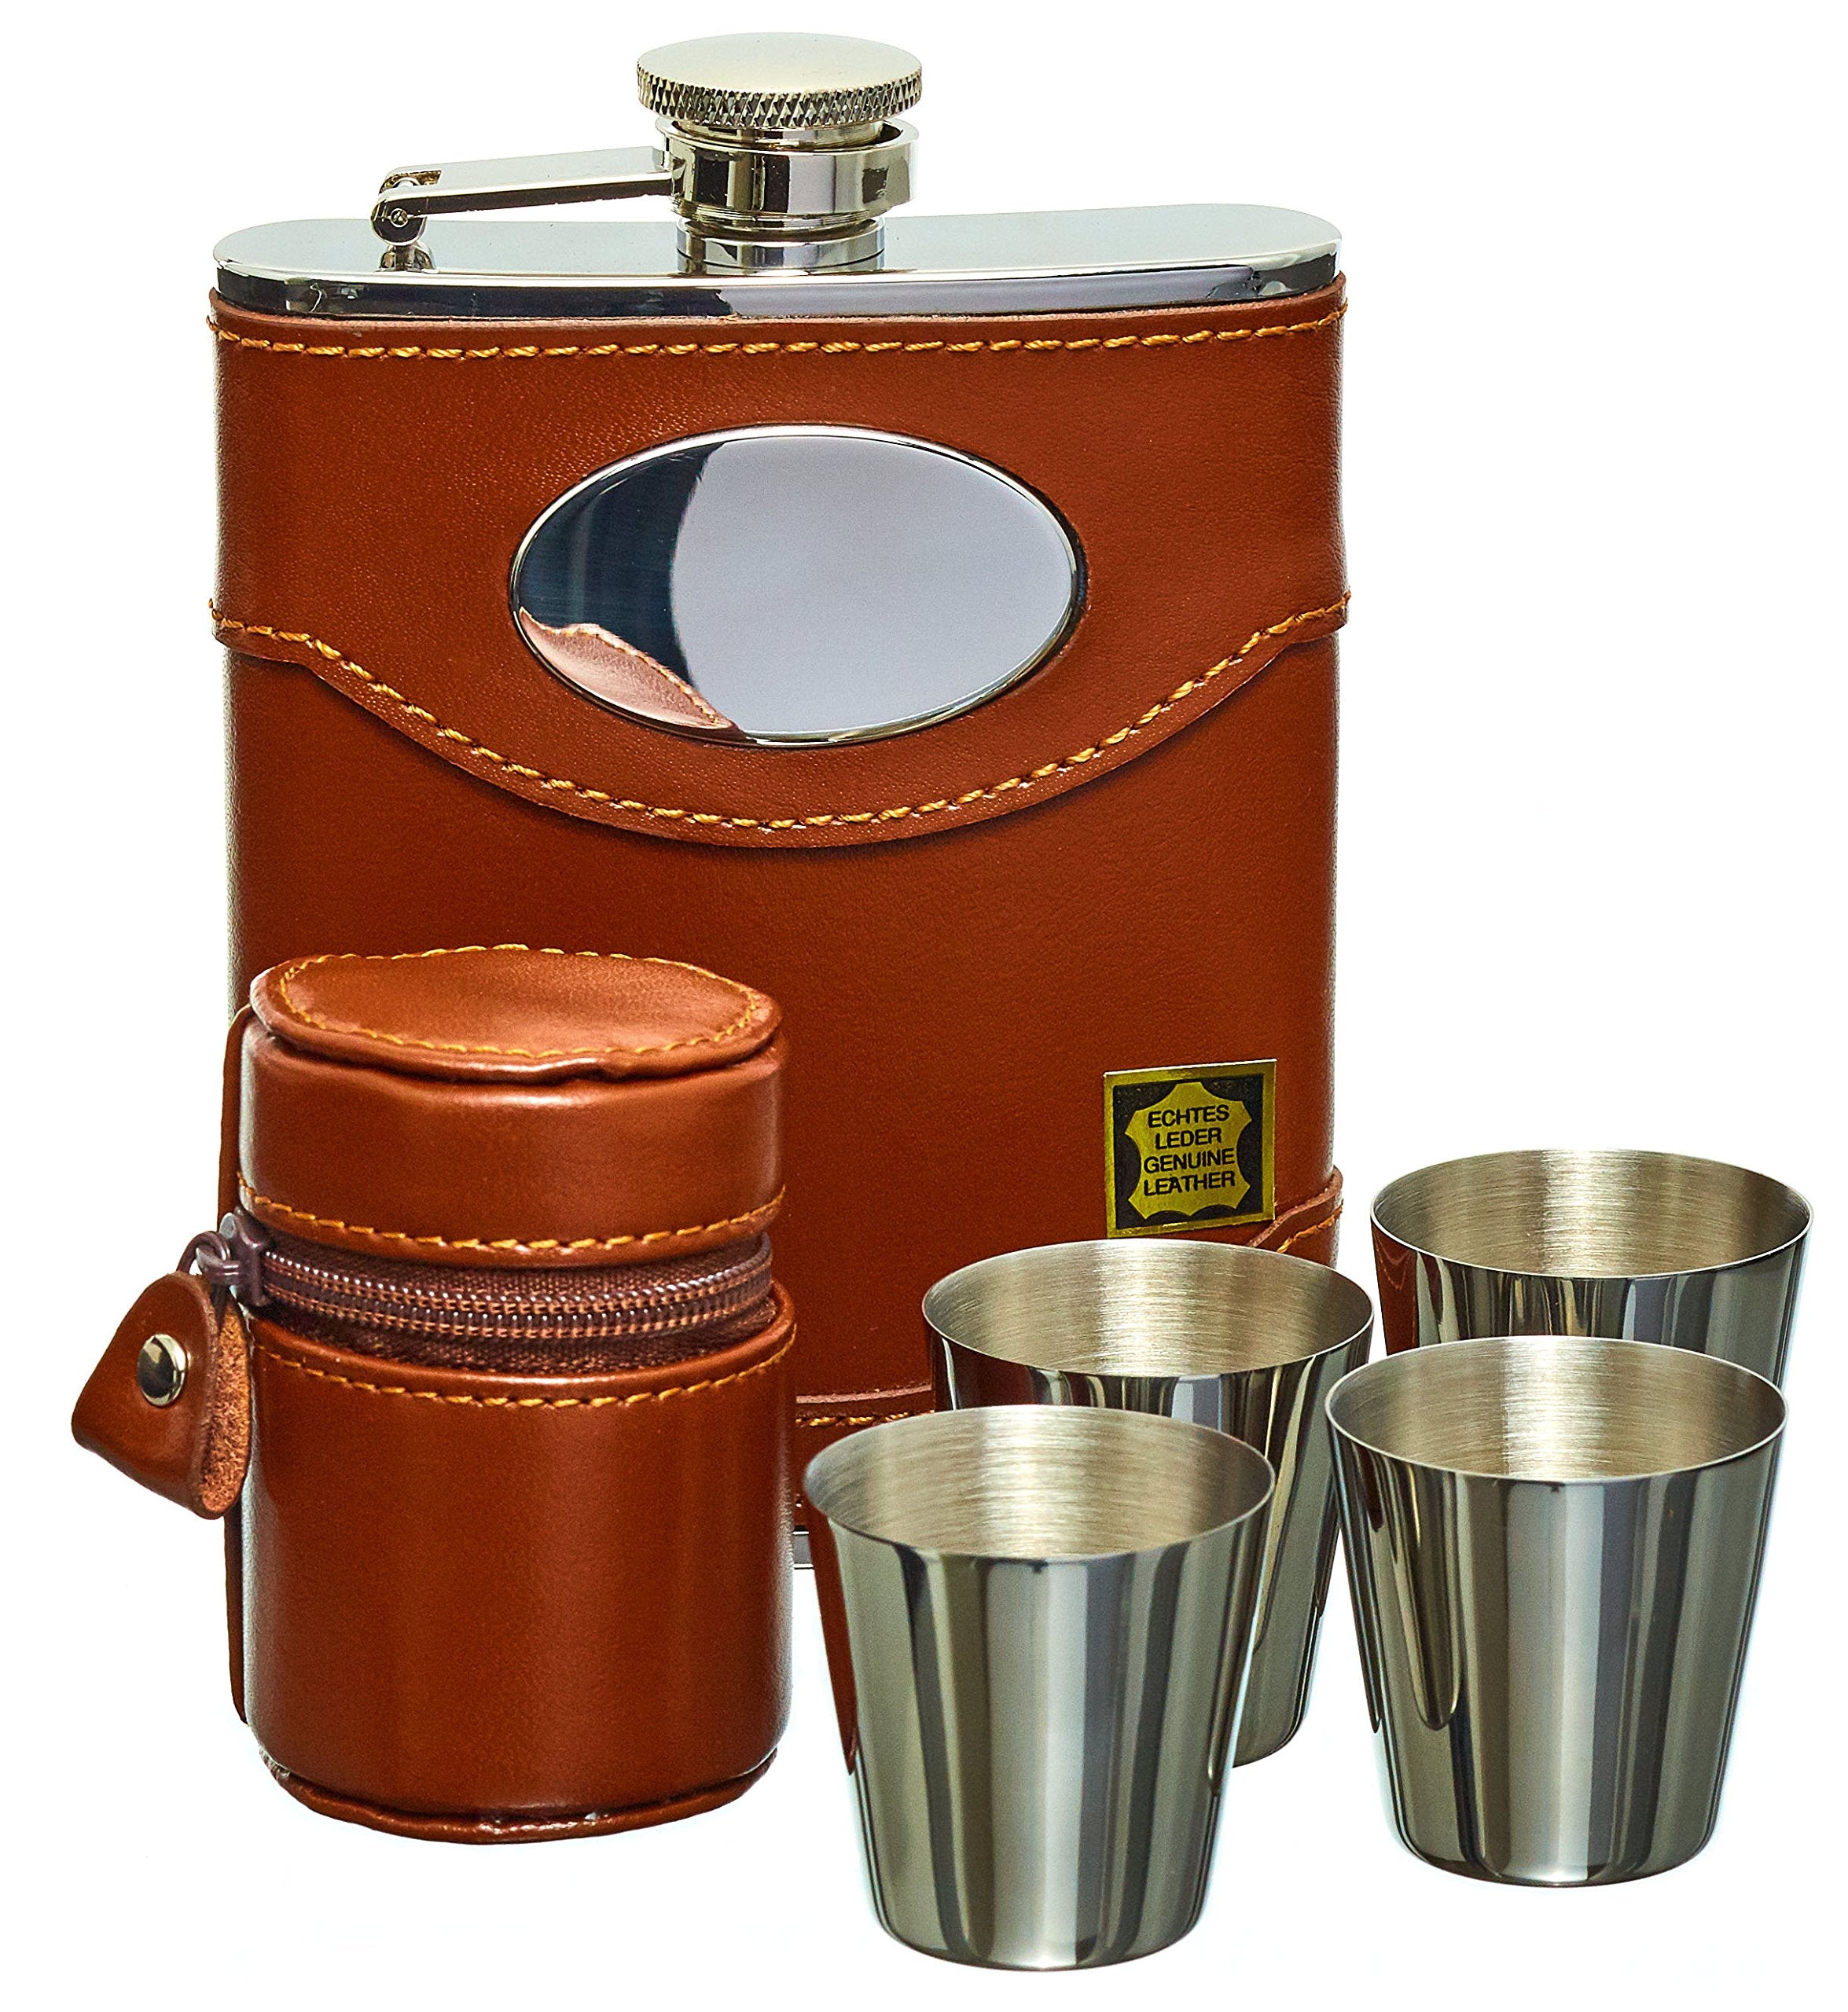 Hip Flask Set, Whiskey Flask Set - 6oz Brown Leather Hip Flask With Engravable Silver Plate + 4 Stainless Steel Cups, Made From Premium Grade Spanish Leather Including Gift Box From Gents Gifts Online